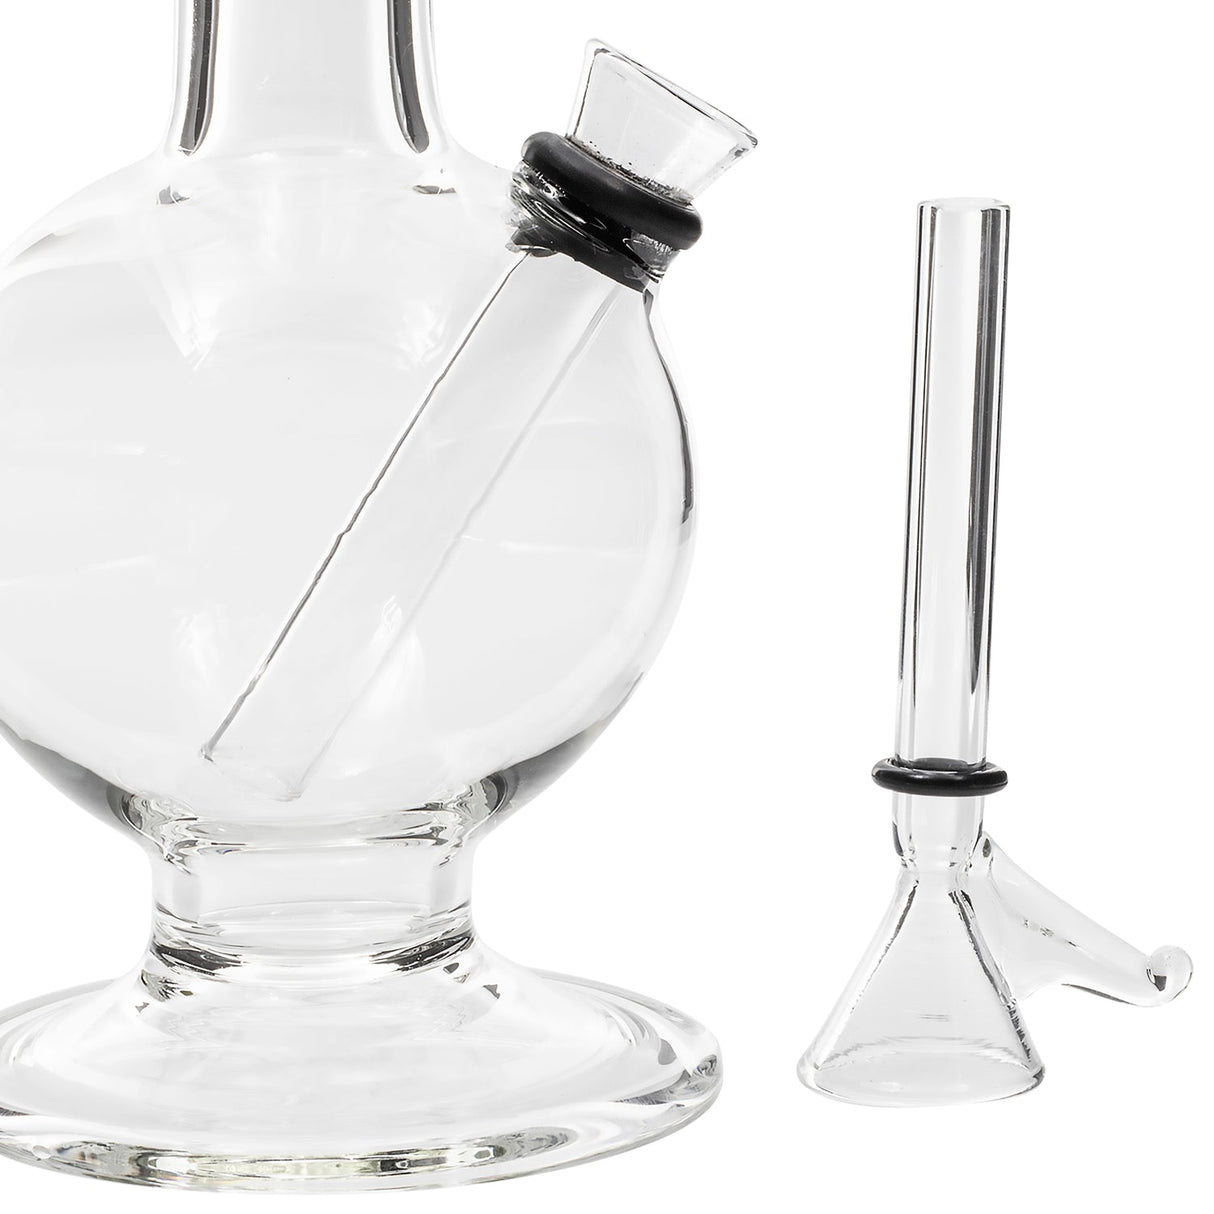 LA Pipes "The Icon" Glass Bubble Bong with Grommet Joint, 12" height, 32mm diameter, front view